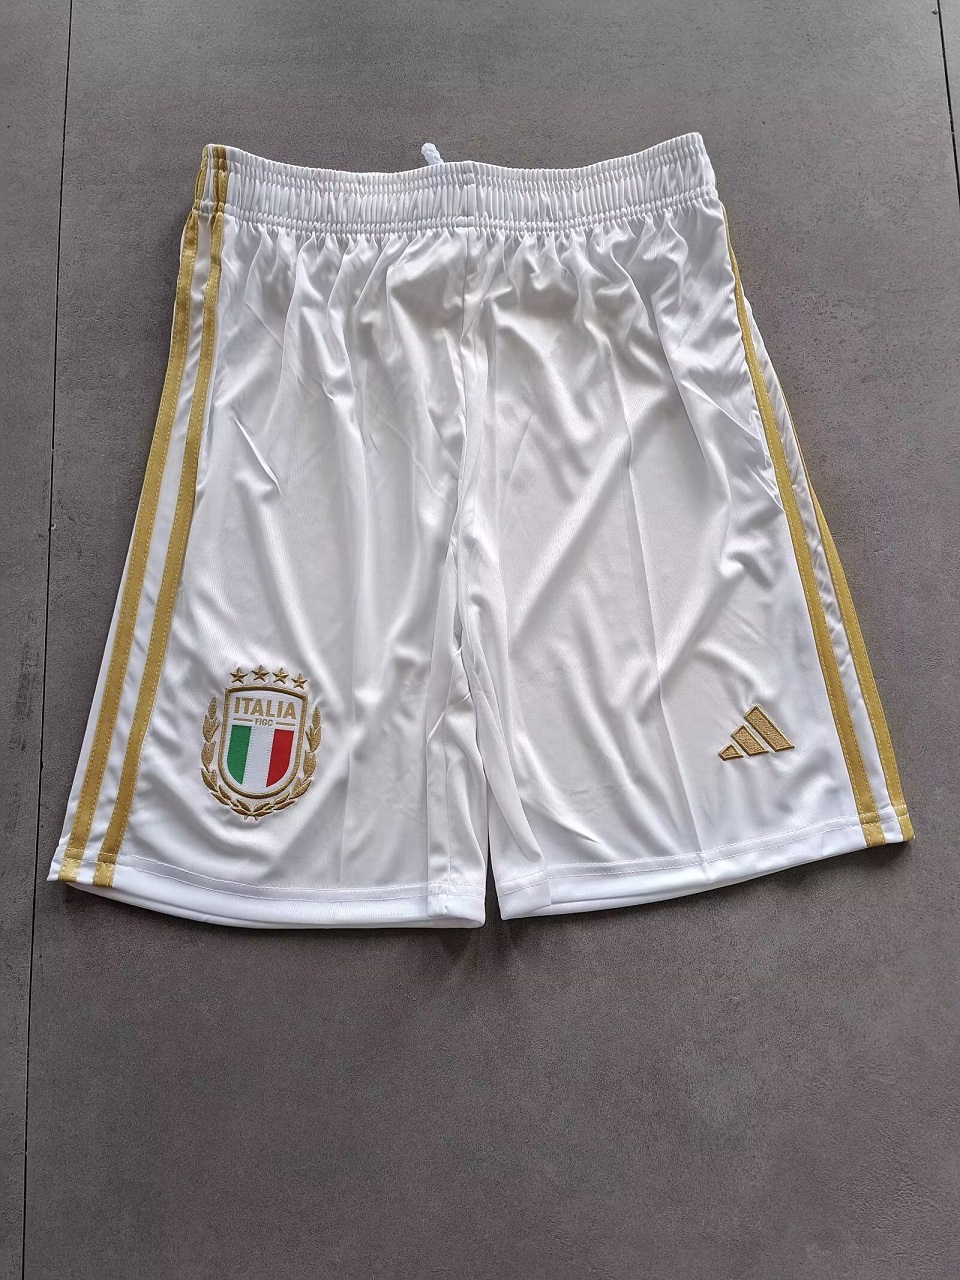 AAA Quality Italy 125th Anniversary White Soccer Shorts